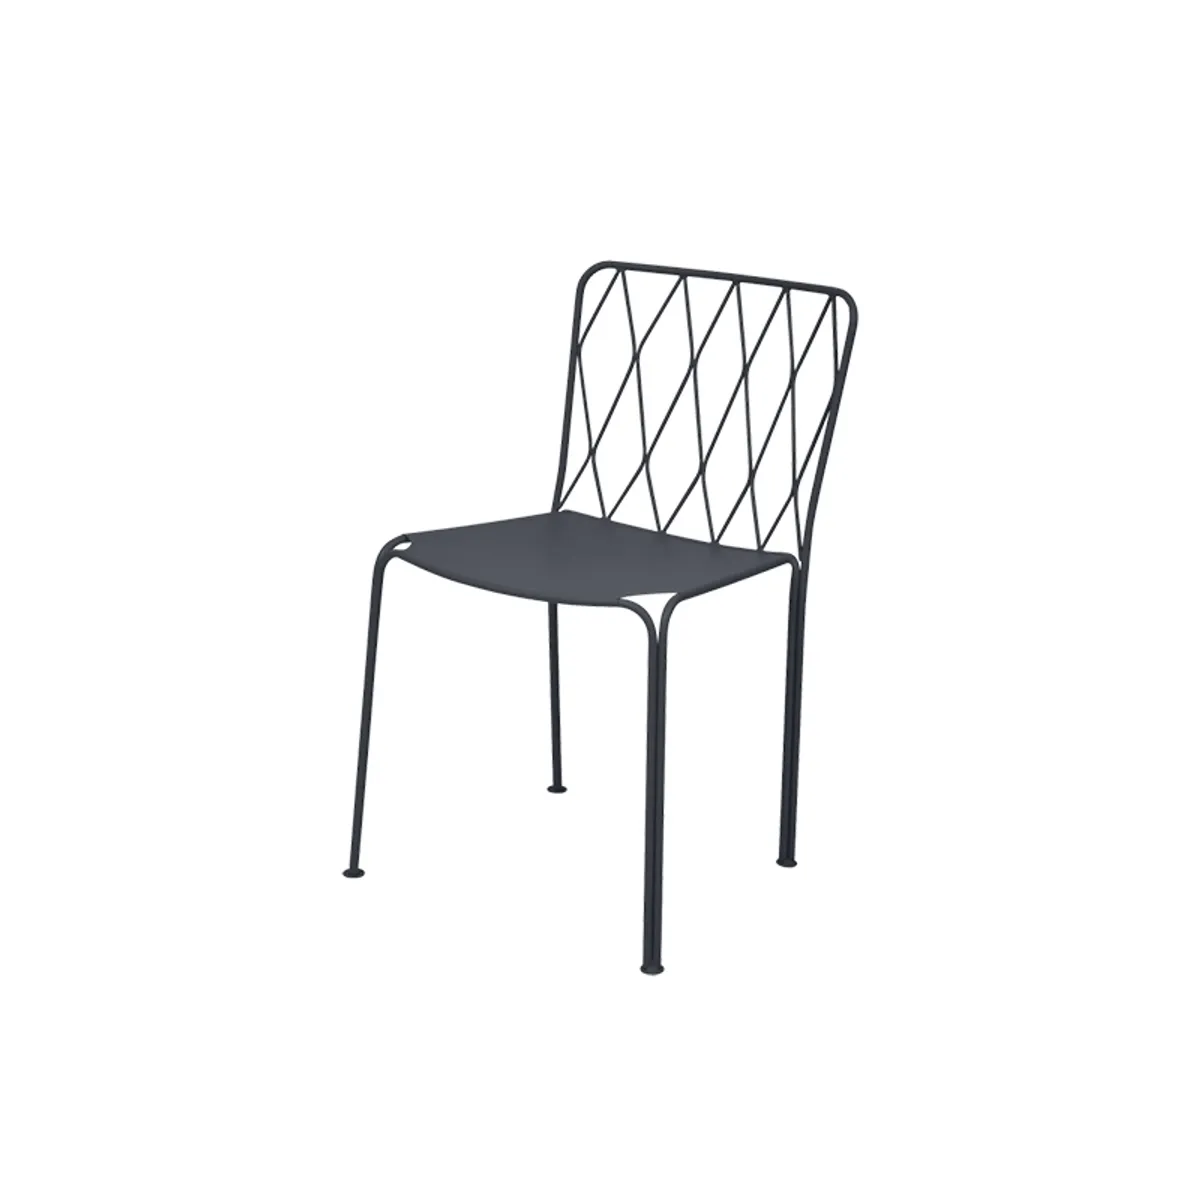 Kintbury Side Chair For Outdoors Bar And Cafe Furniture